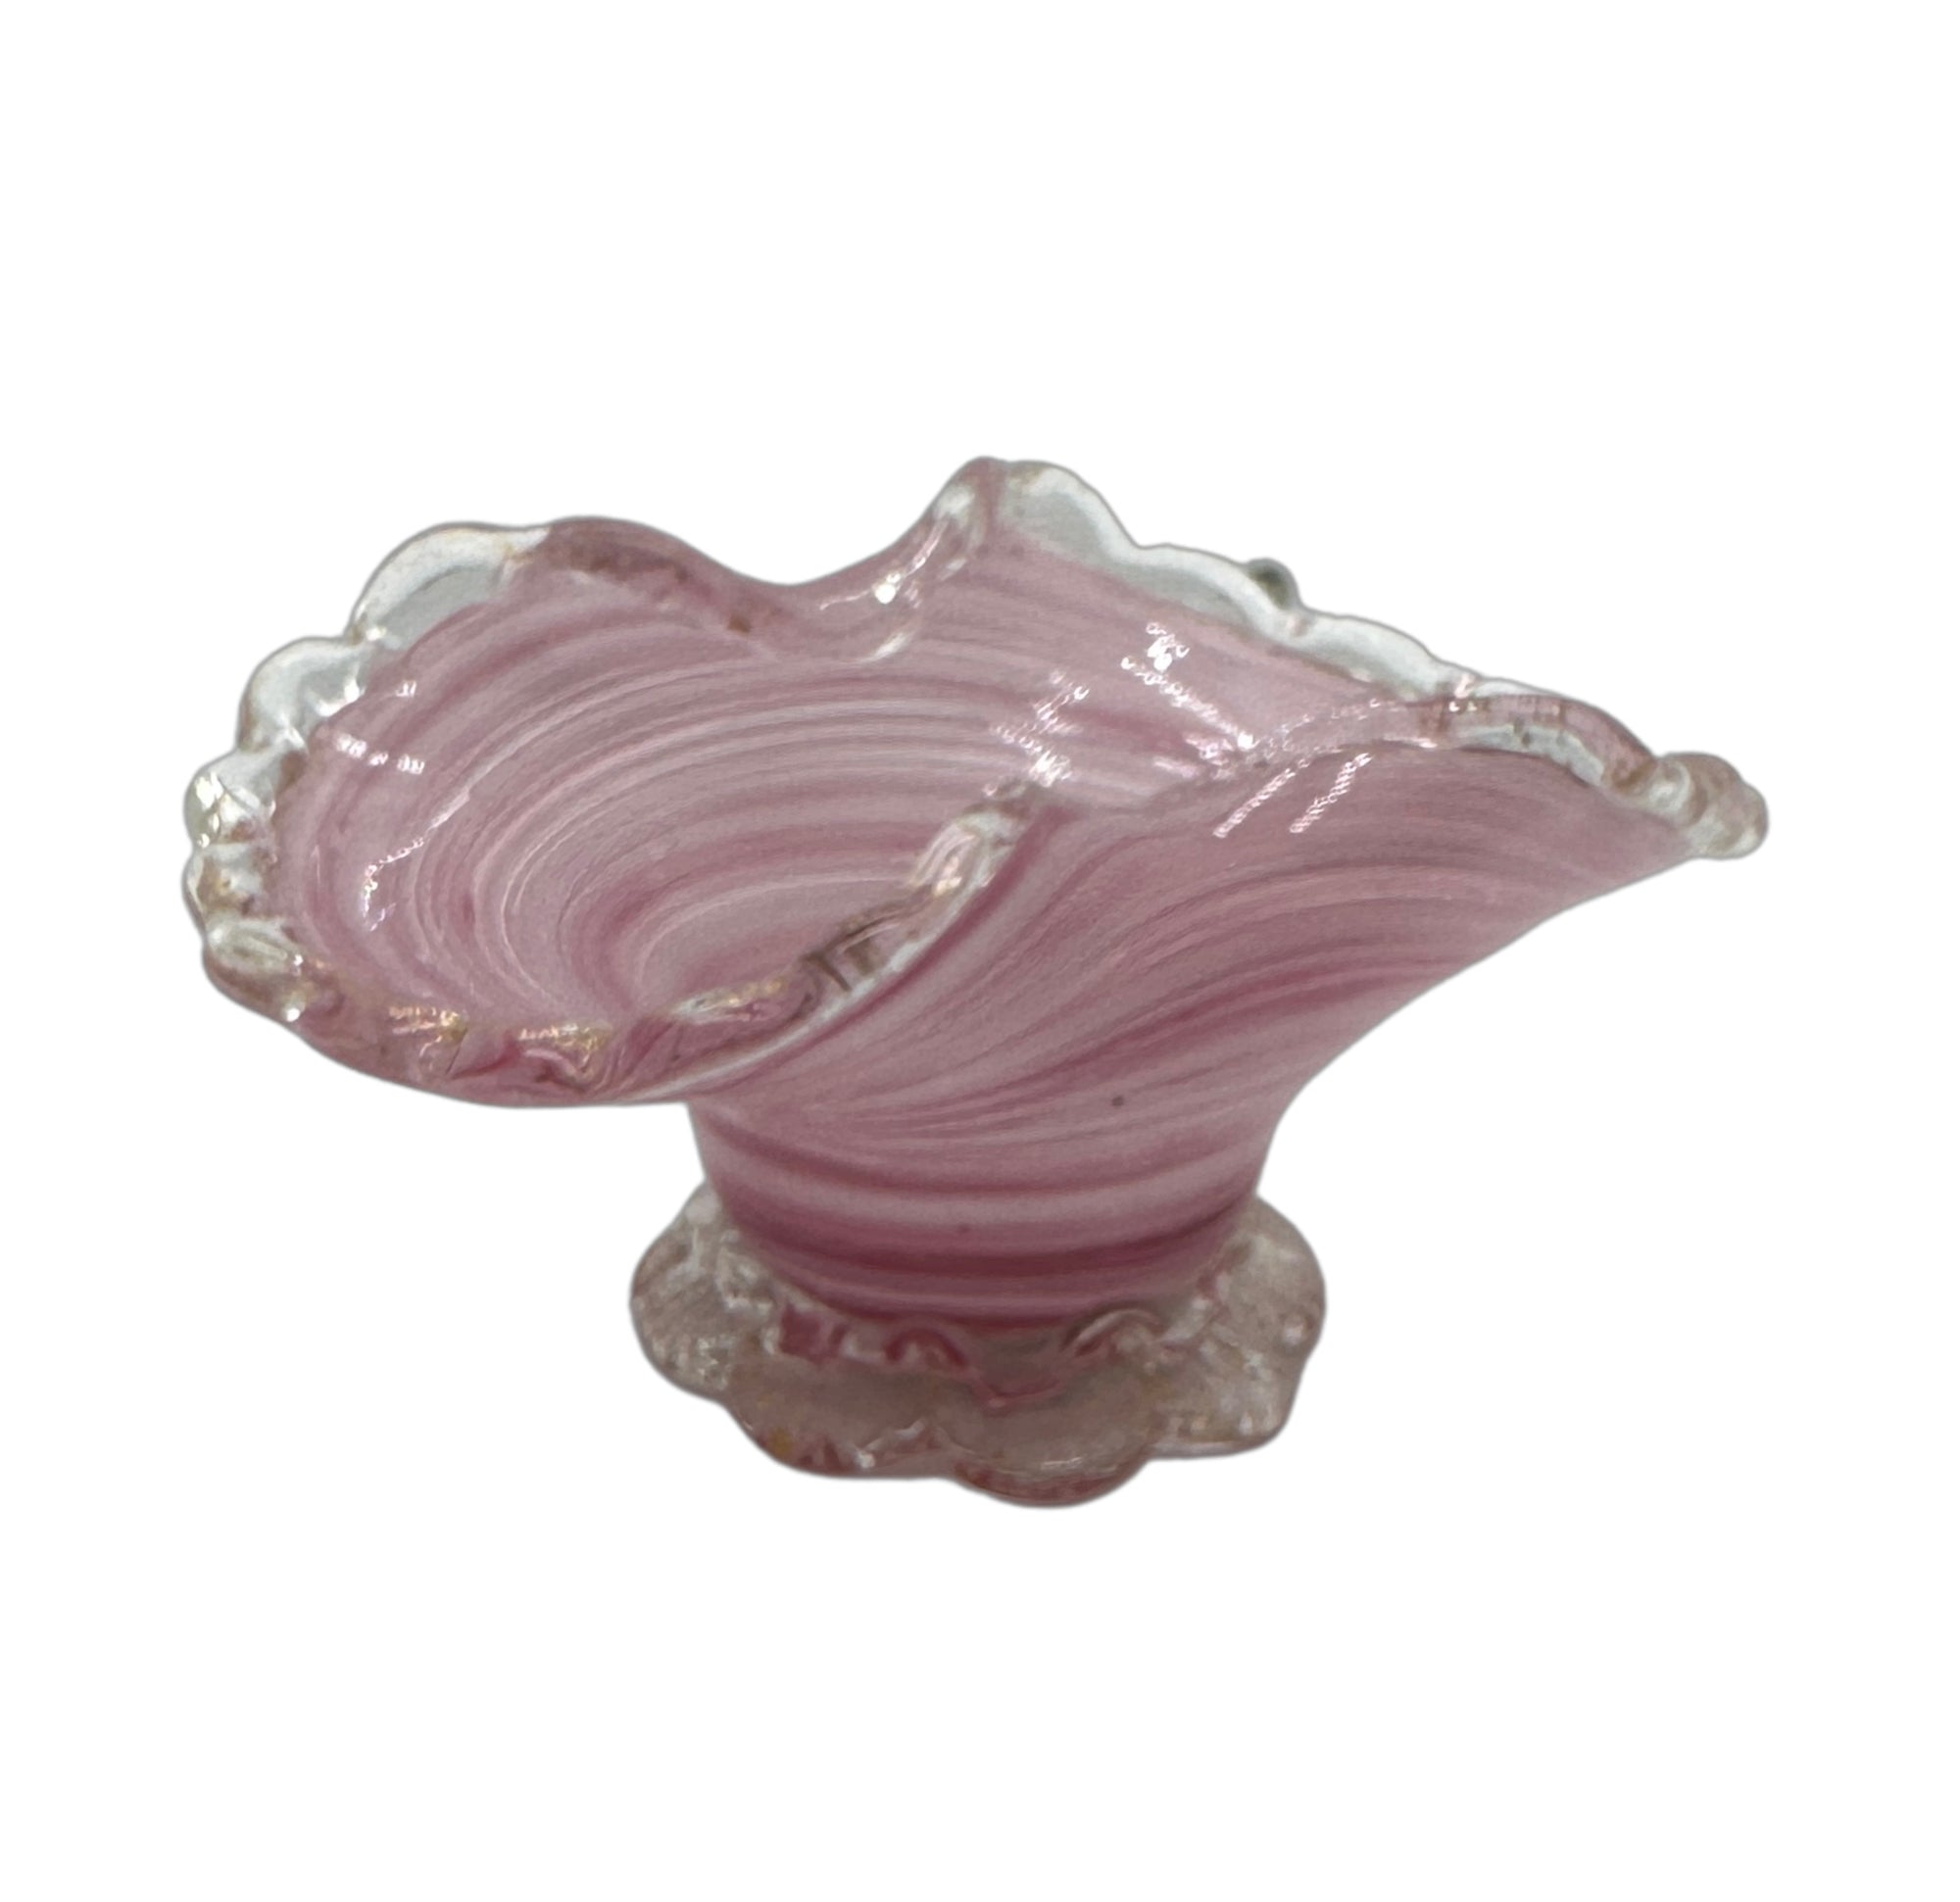 Vintage Muarno Small Pink Bowl with Ruffle